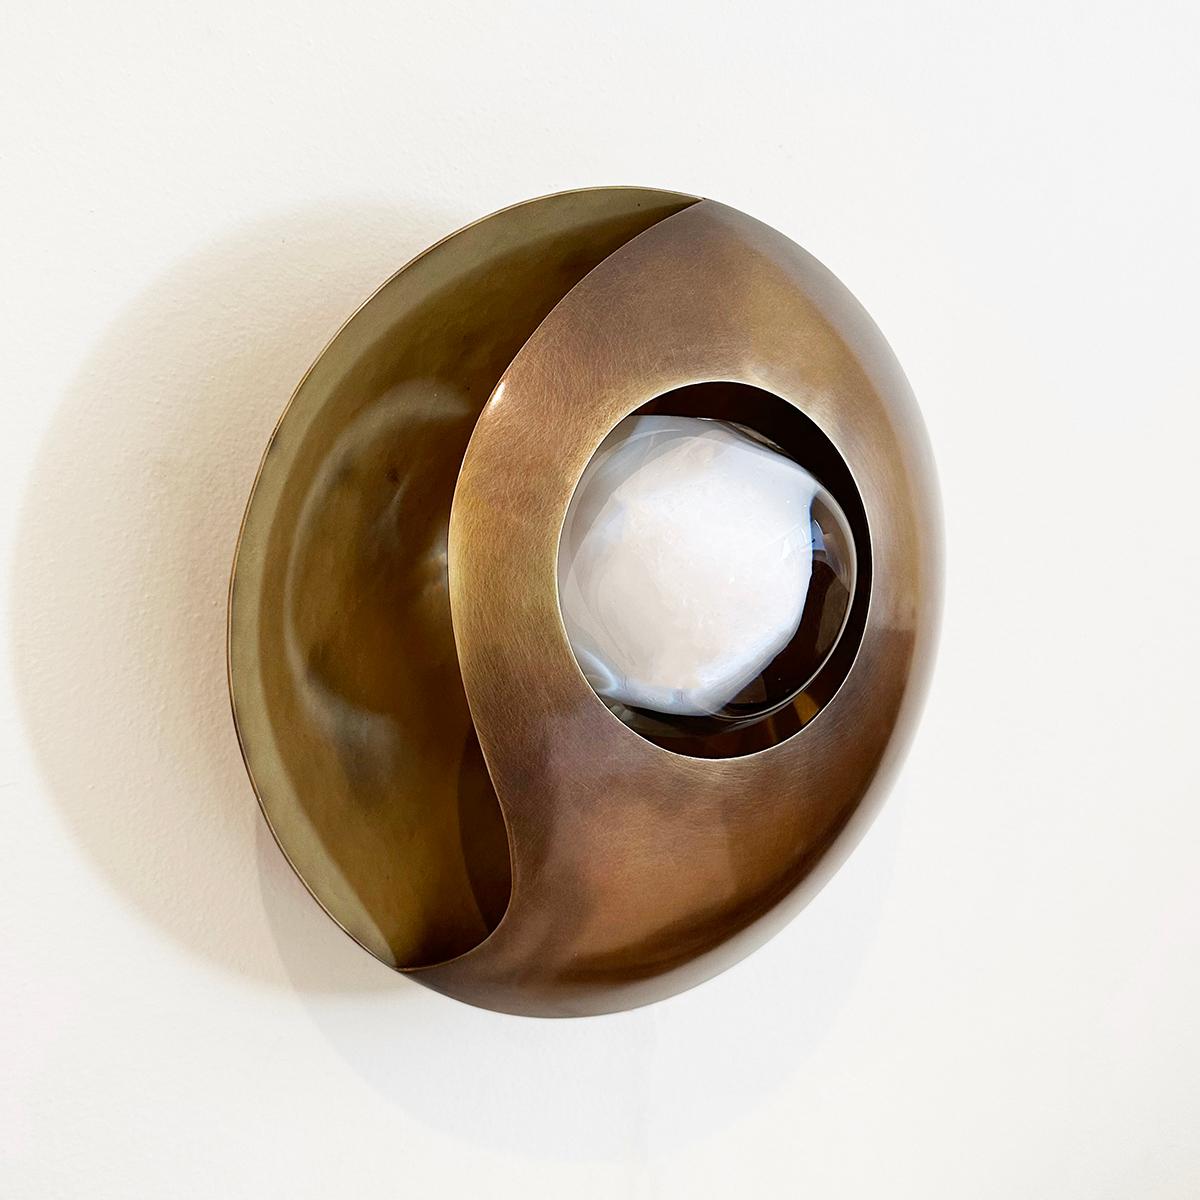 The Luna wall light’s simple round shape is elevated by its elliptical cross-section and distinctive cut-outs that let out a soft glow. At the center is our Sfera glass handblown in Murano. Shown with a satin brass interior and bronzo nuvolato